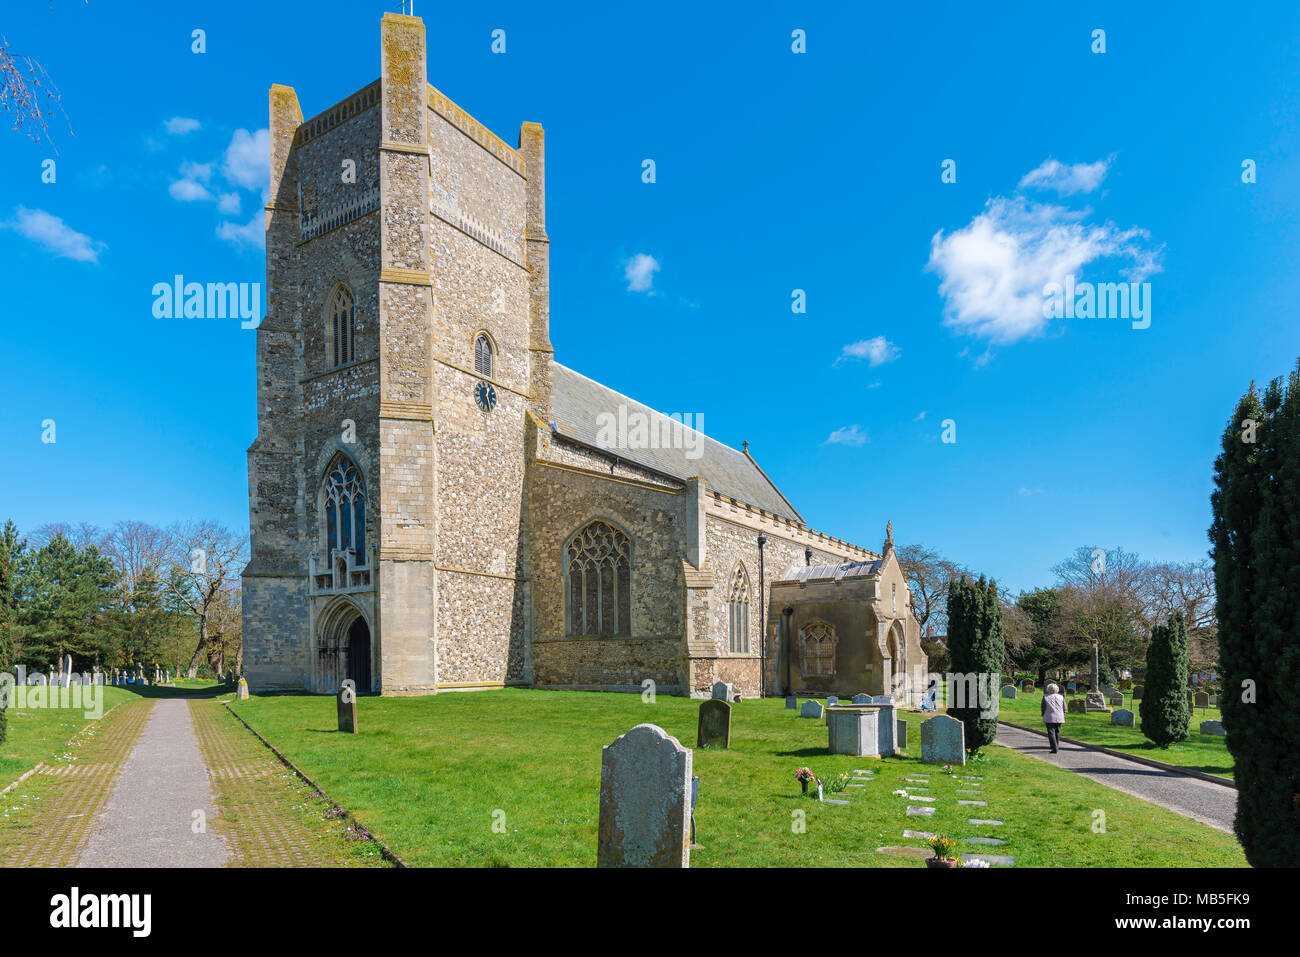 Orford church, view of St Bartholomew's Church in the Suffolk town of Orford, East Anglia, UK. Stock Photo